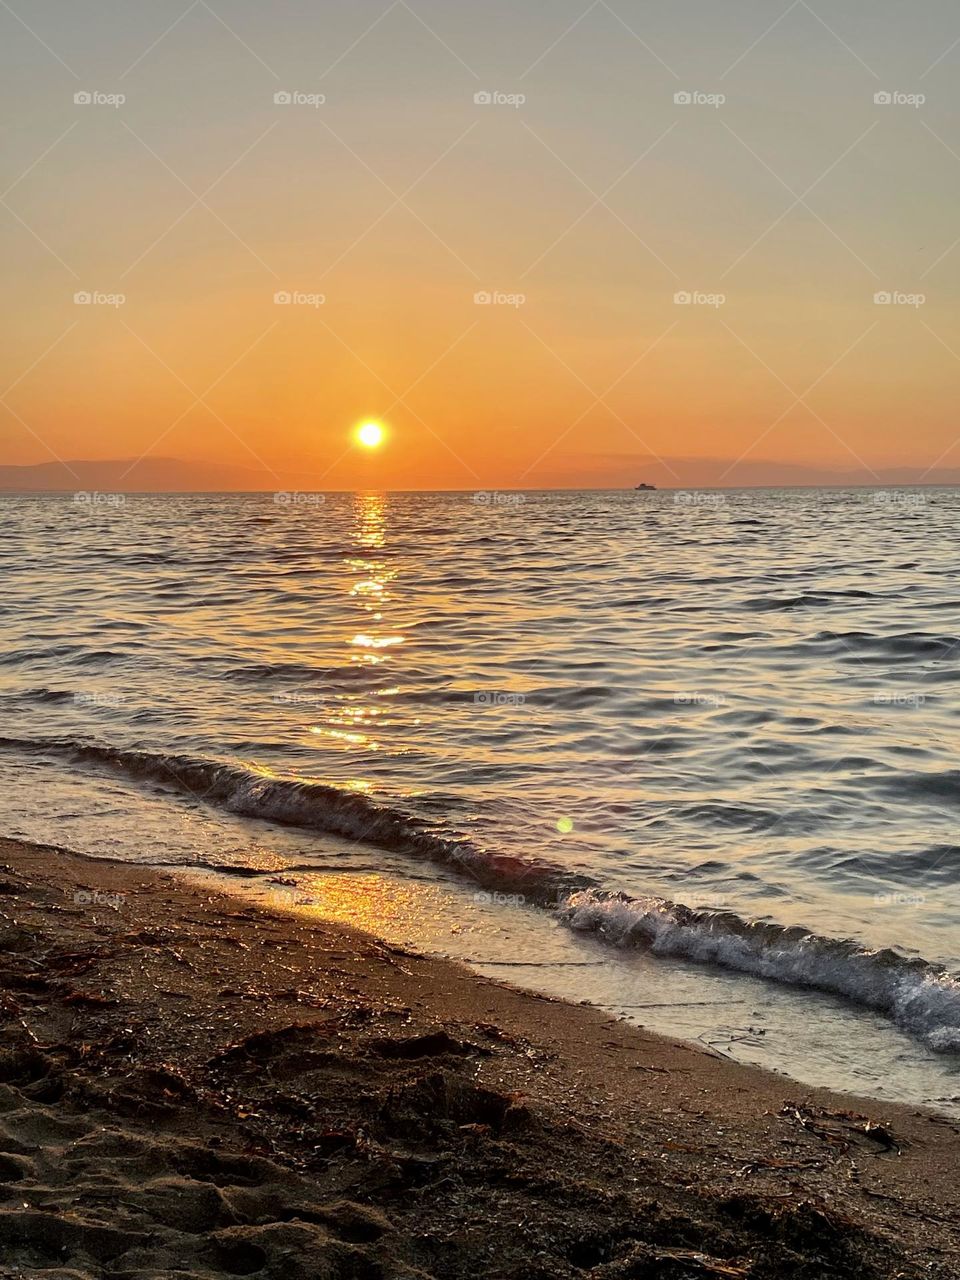 Sea view at the sunset, Greece,Perea